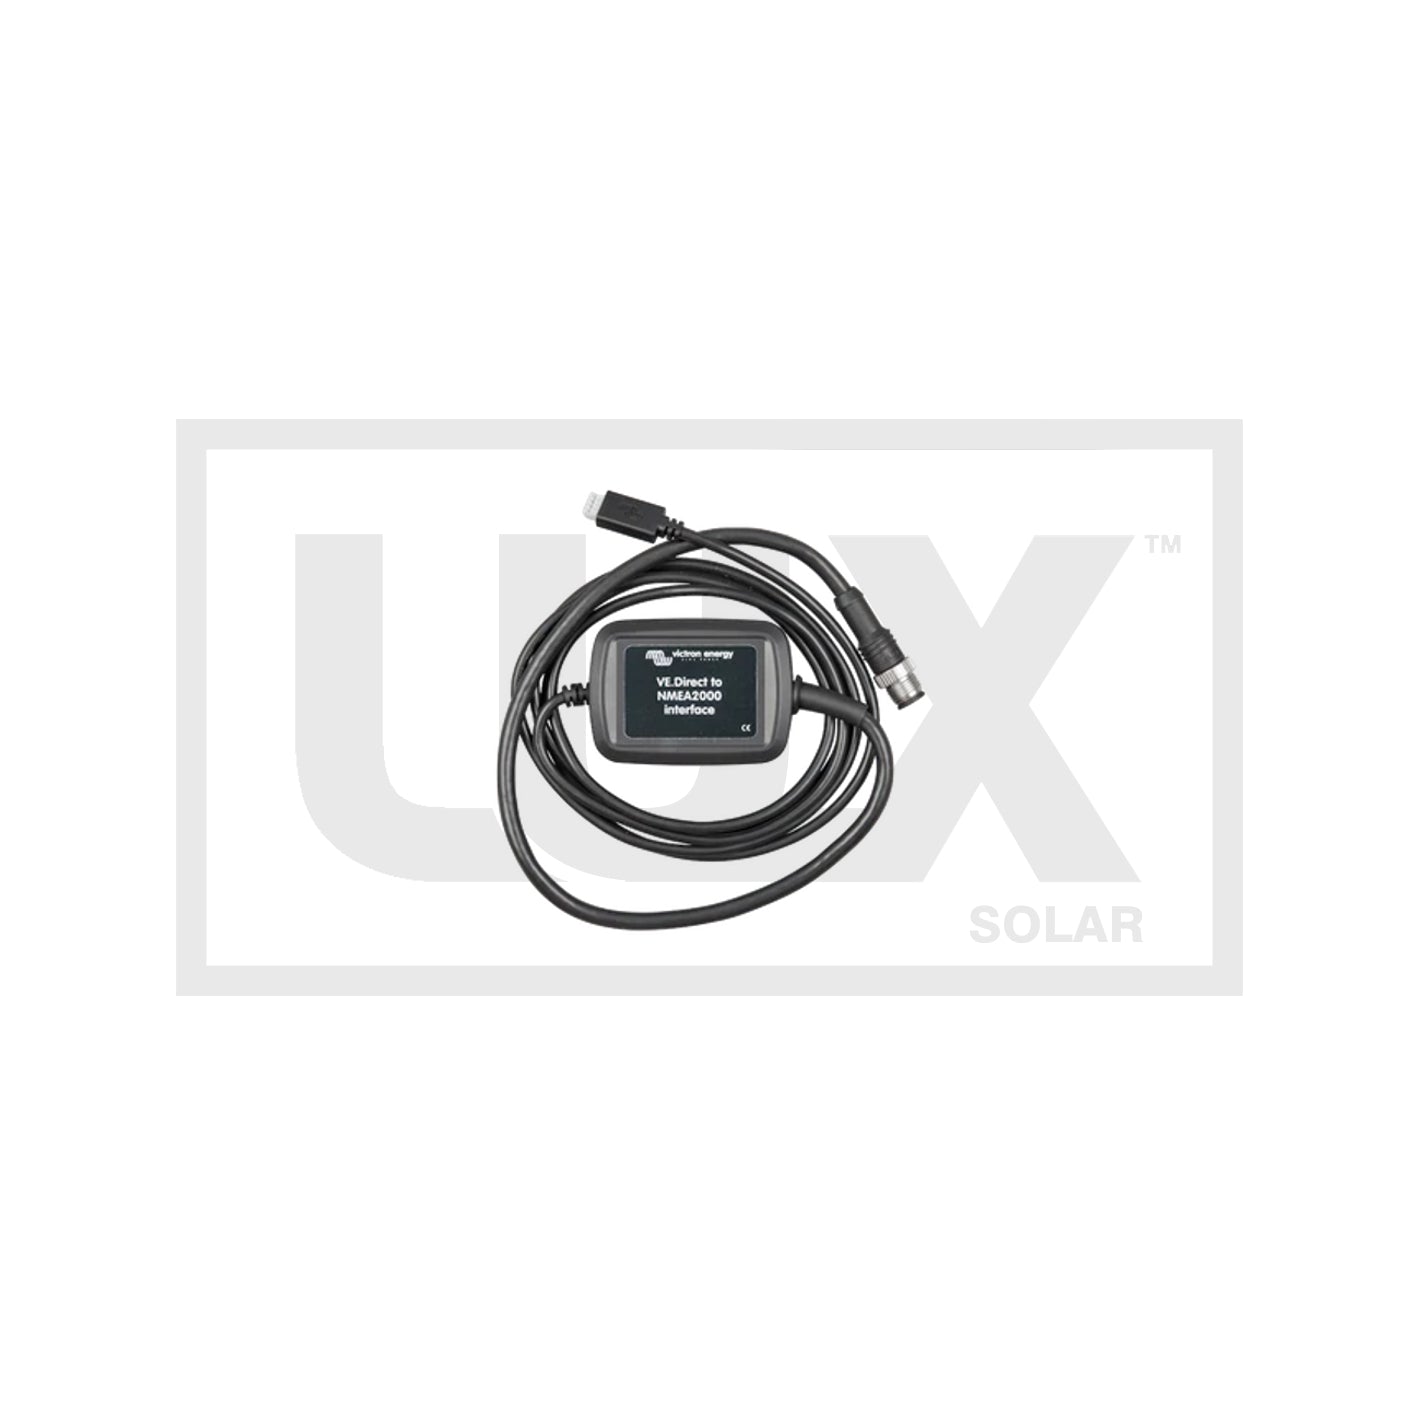 Interfaces to connect Victron products to NMEA2000